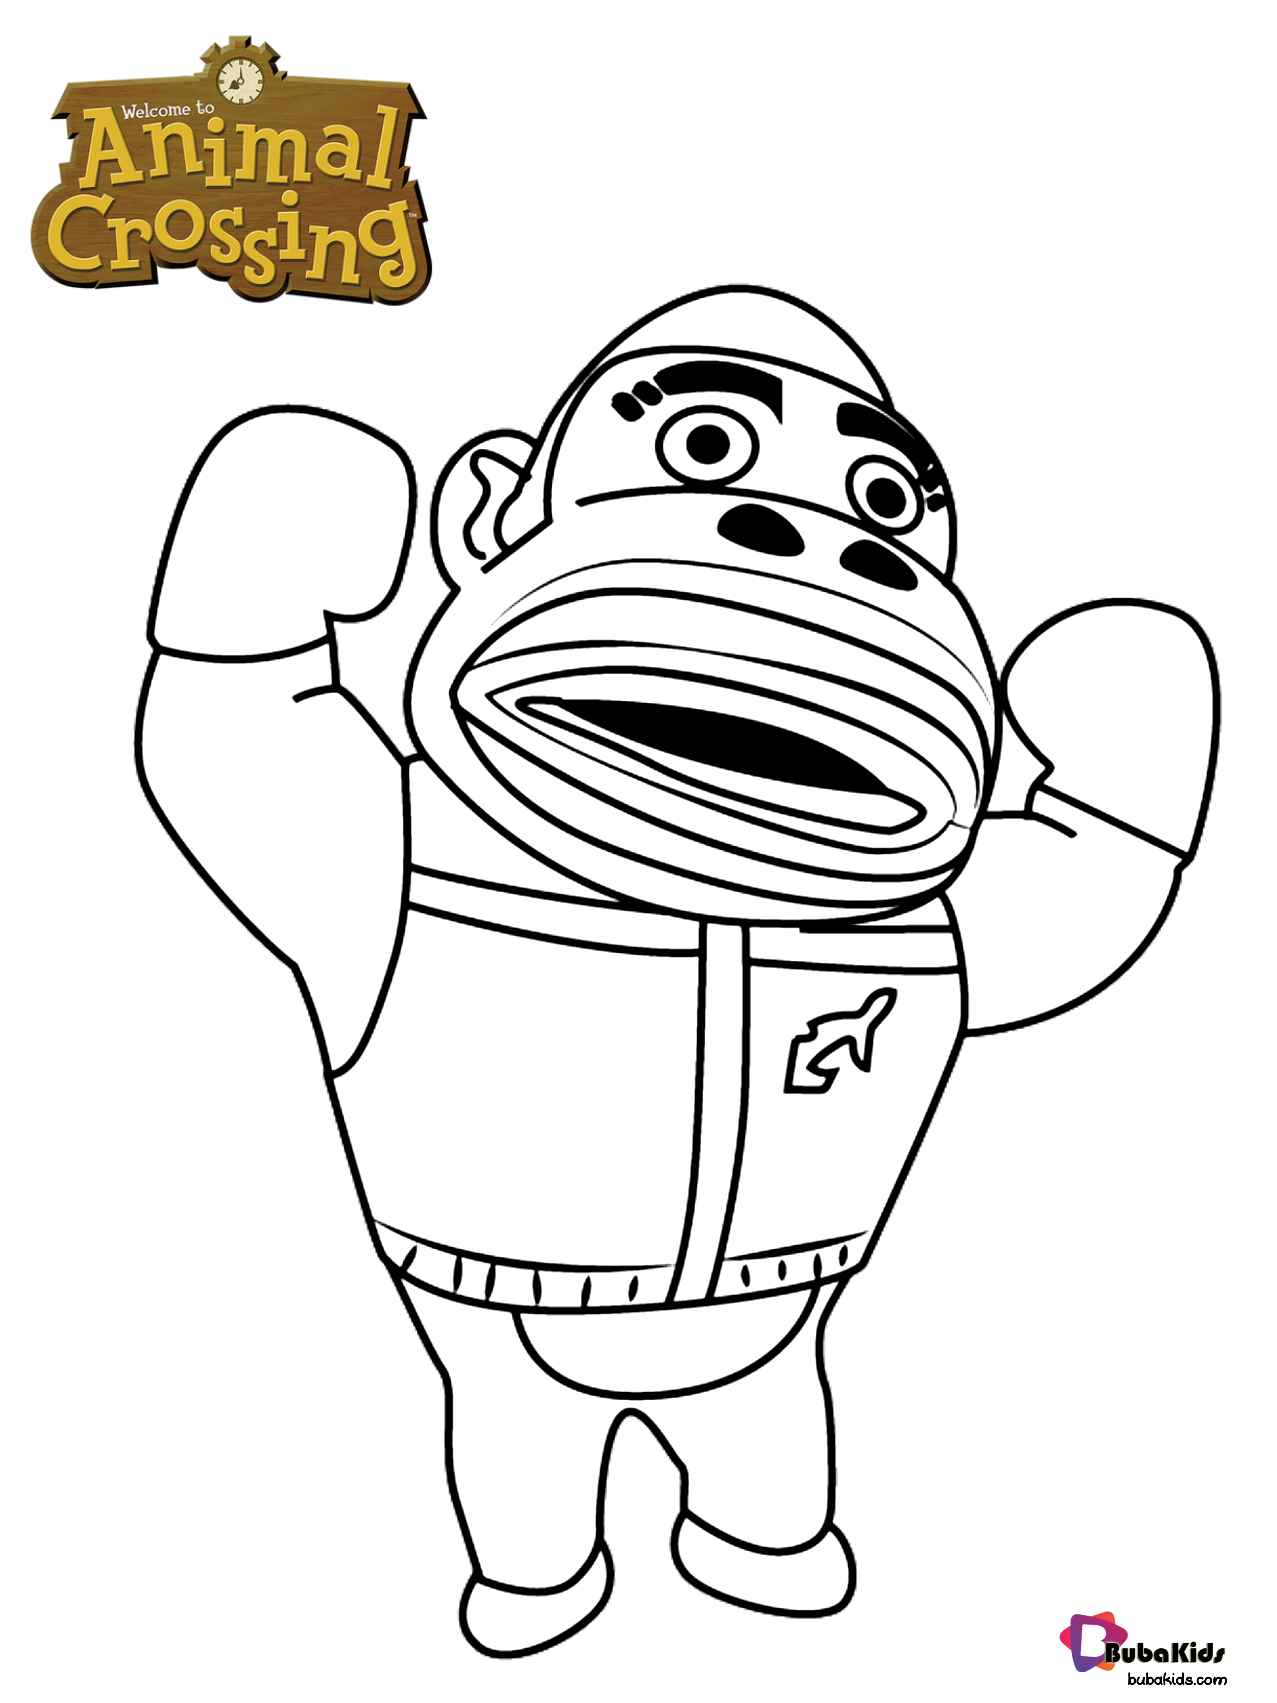 Al the gorilla character from Animal Crossing video games coloring page